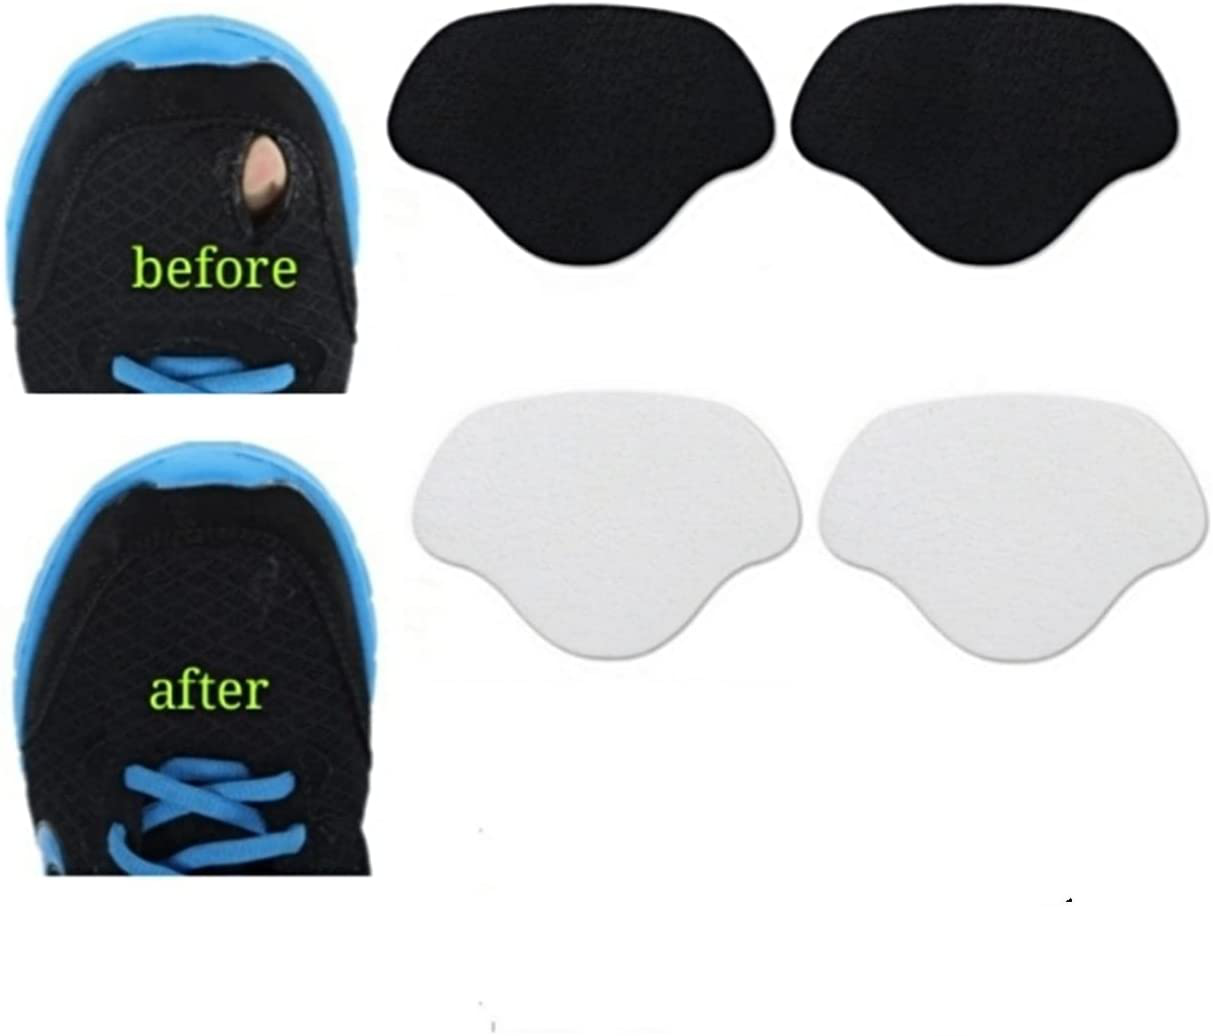 Heng Happy Sneaker Toebox/Heel Blowout Prevention Repair, Shoe Hole Toeburst Patch/Insert, Wear Self-Adhesive, 1Pairs of Black and 1 Pair of White